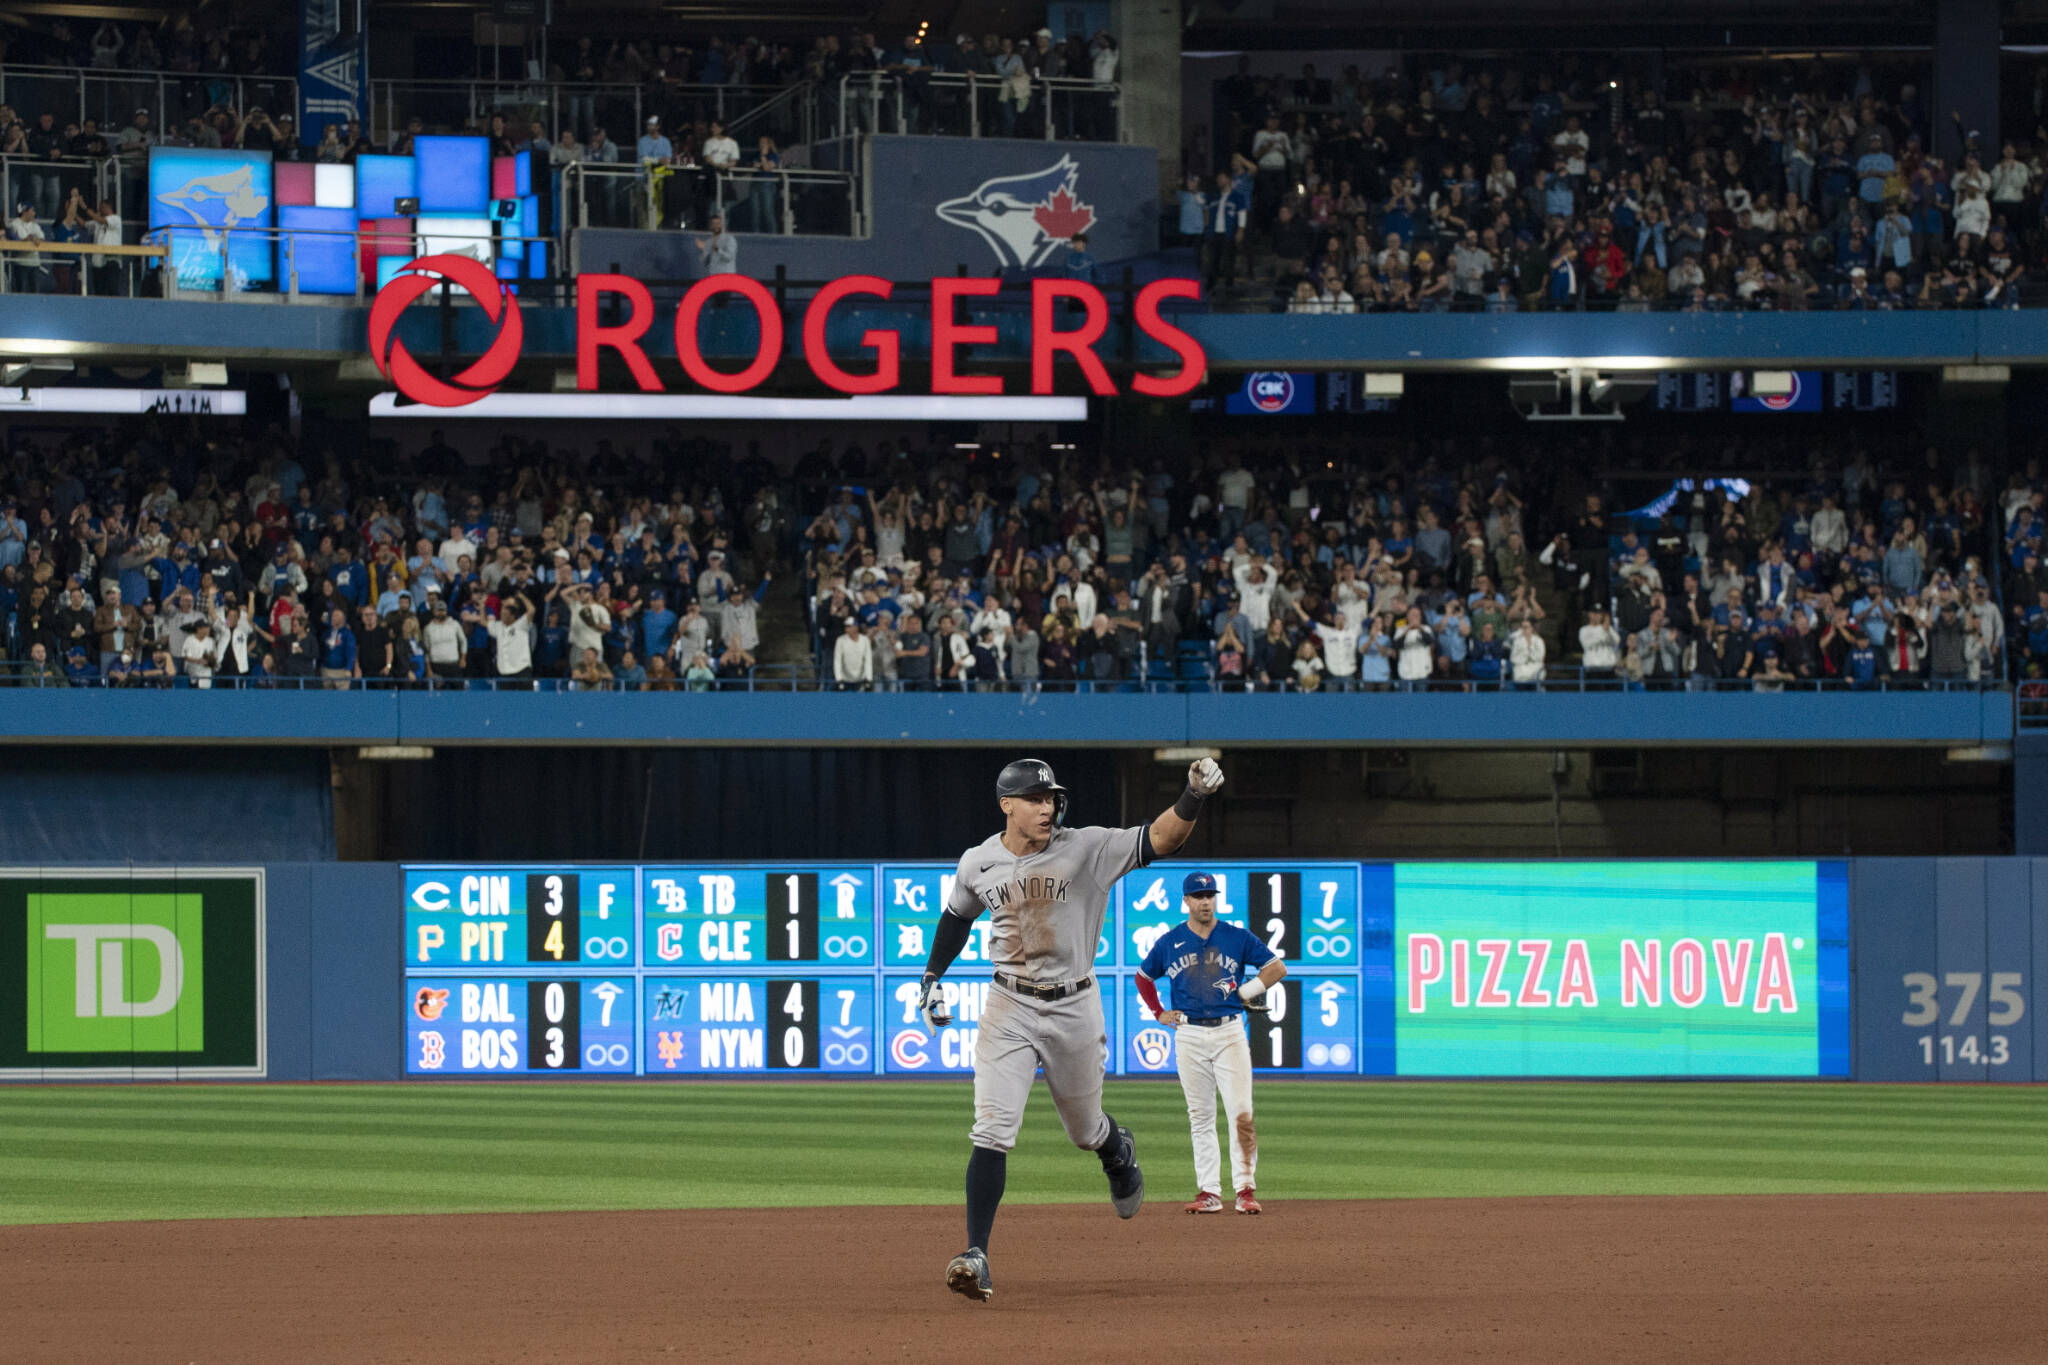 The Yankees’ Aaron Judge runs the bases after hitting his 61st home run of the season during the seventh inning of a game against the Blue Jays on Wednesday in Toronto. (Alex Lupul/The Canadian Press via AP)